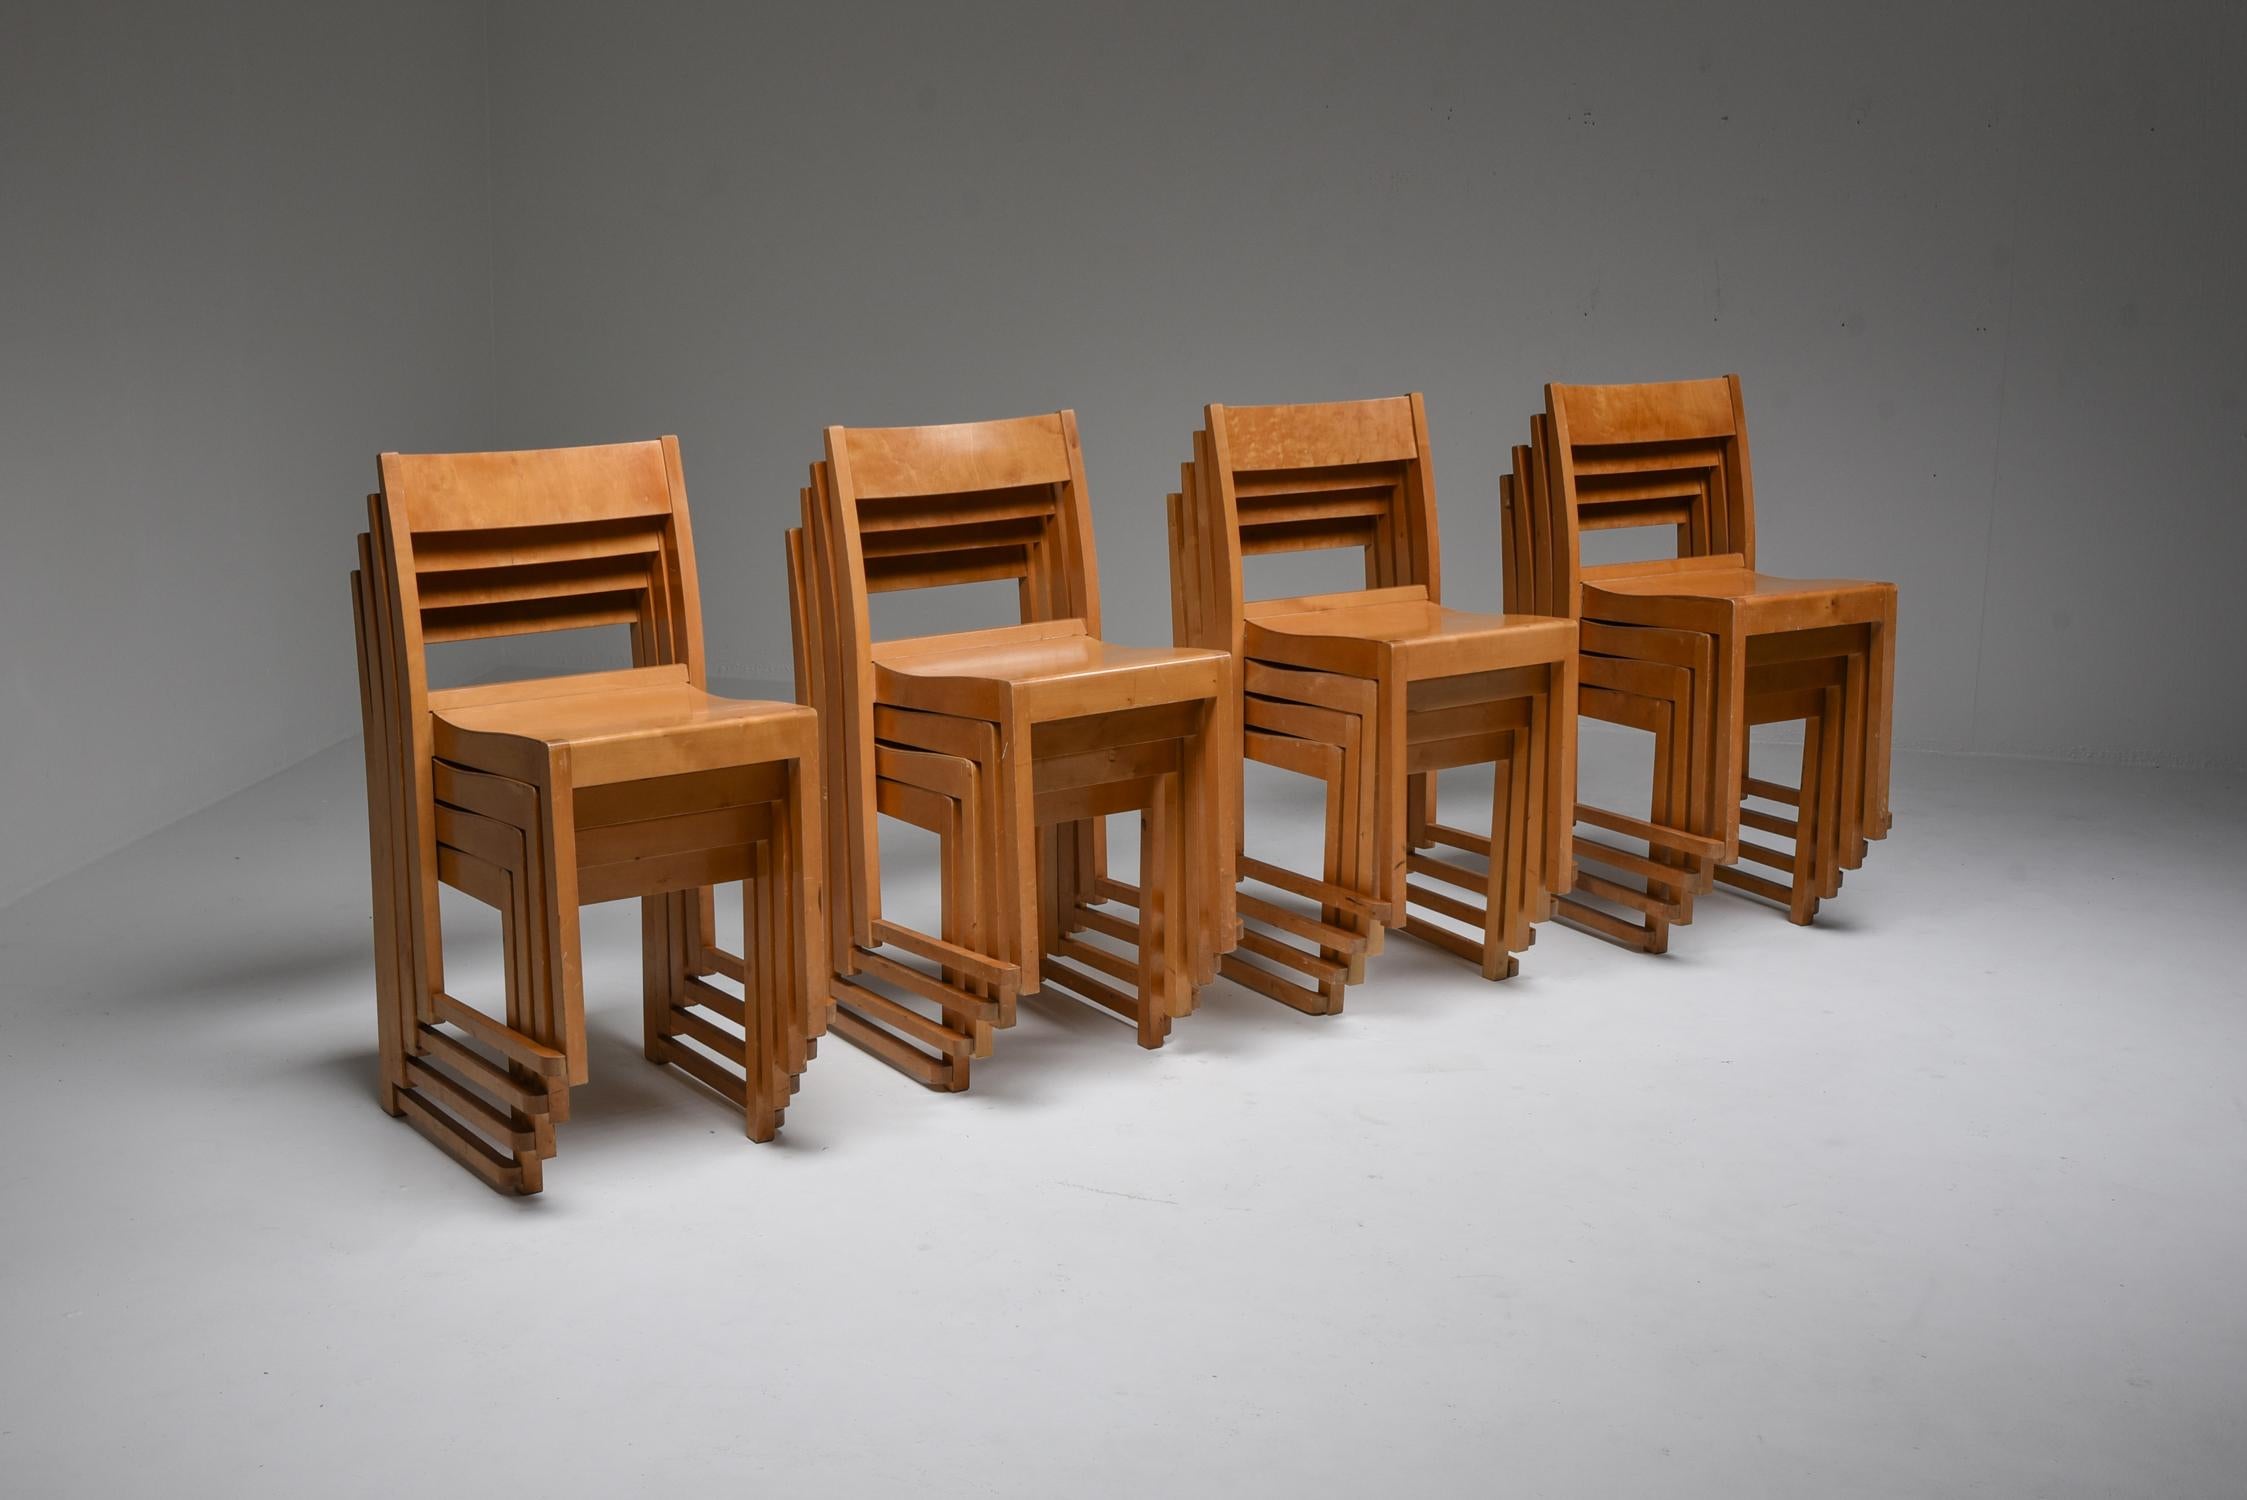 Scandinavian modern, birch, stackable 'orchestra' chairs, Sven Markelius, Sweden, 1930s.

These modernist chairs were especially designed for the Helsingborg Concert Hall.
Clean and simple lines make these very early modernist chairs a great and